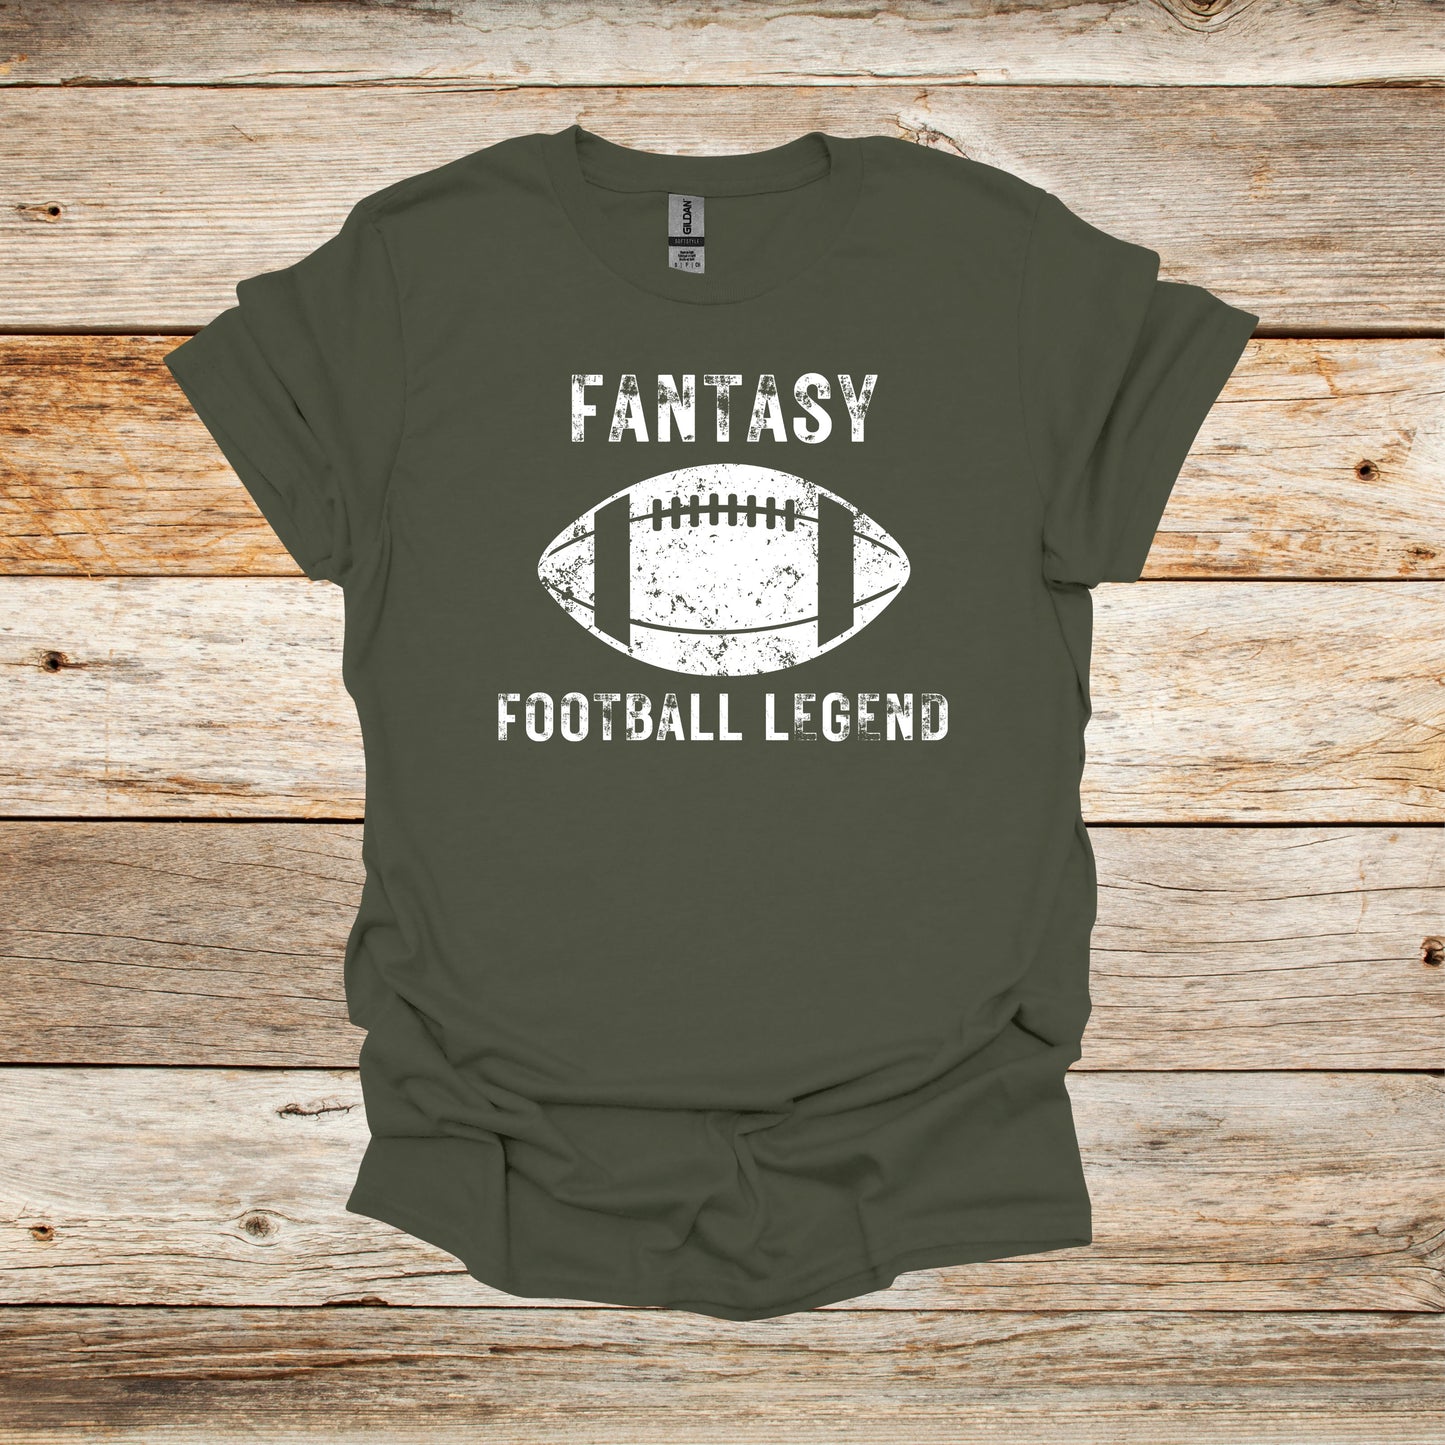 Football T-Shirt - Adult and Children's Tee Shirts - Fantasy Football - Sports T-Shirts Graphic Avenue Military Green Adult Small 